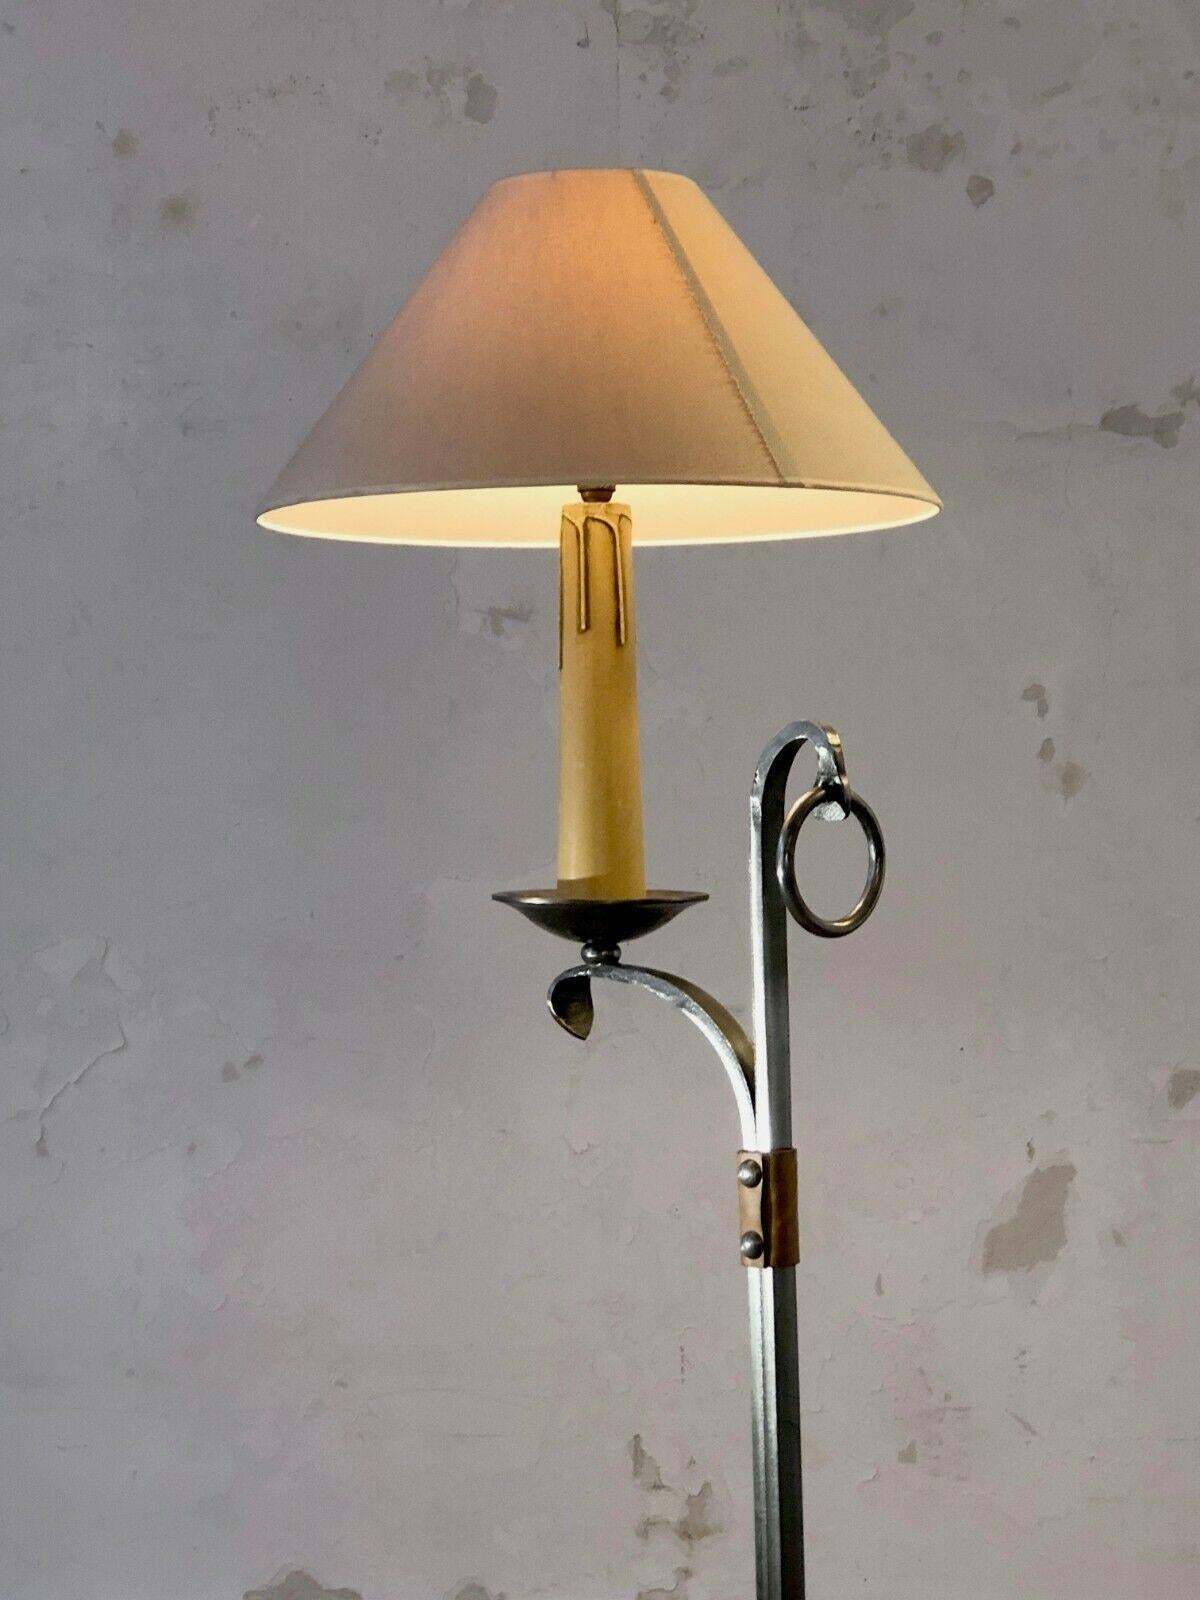 French A NEOCLASSICAL BRUTALIST FLOOR LAMP, by JEAN-PIERRE RYCKAERT, France 1960 For Sale